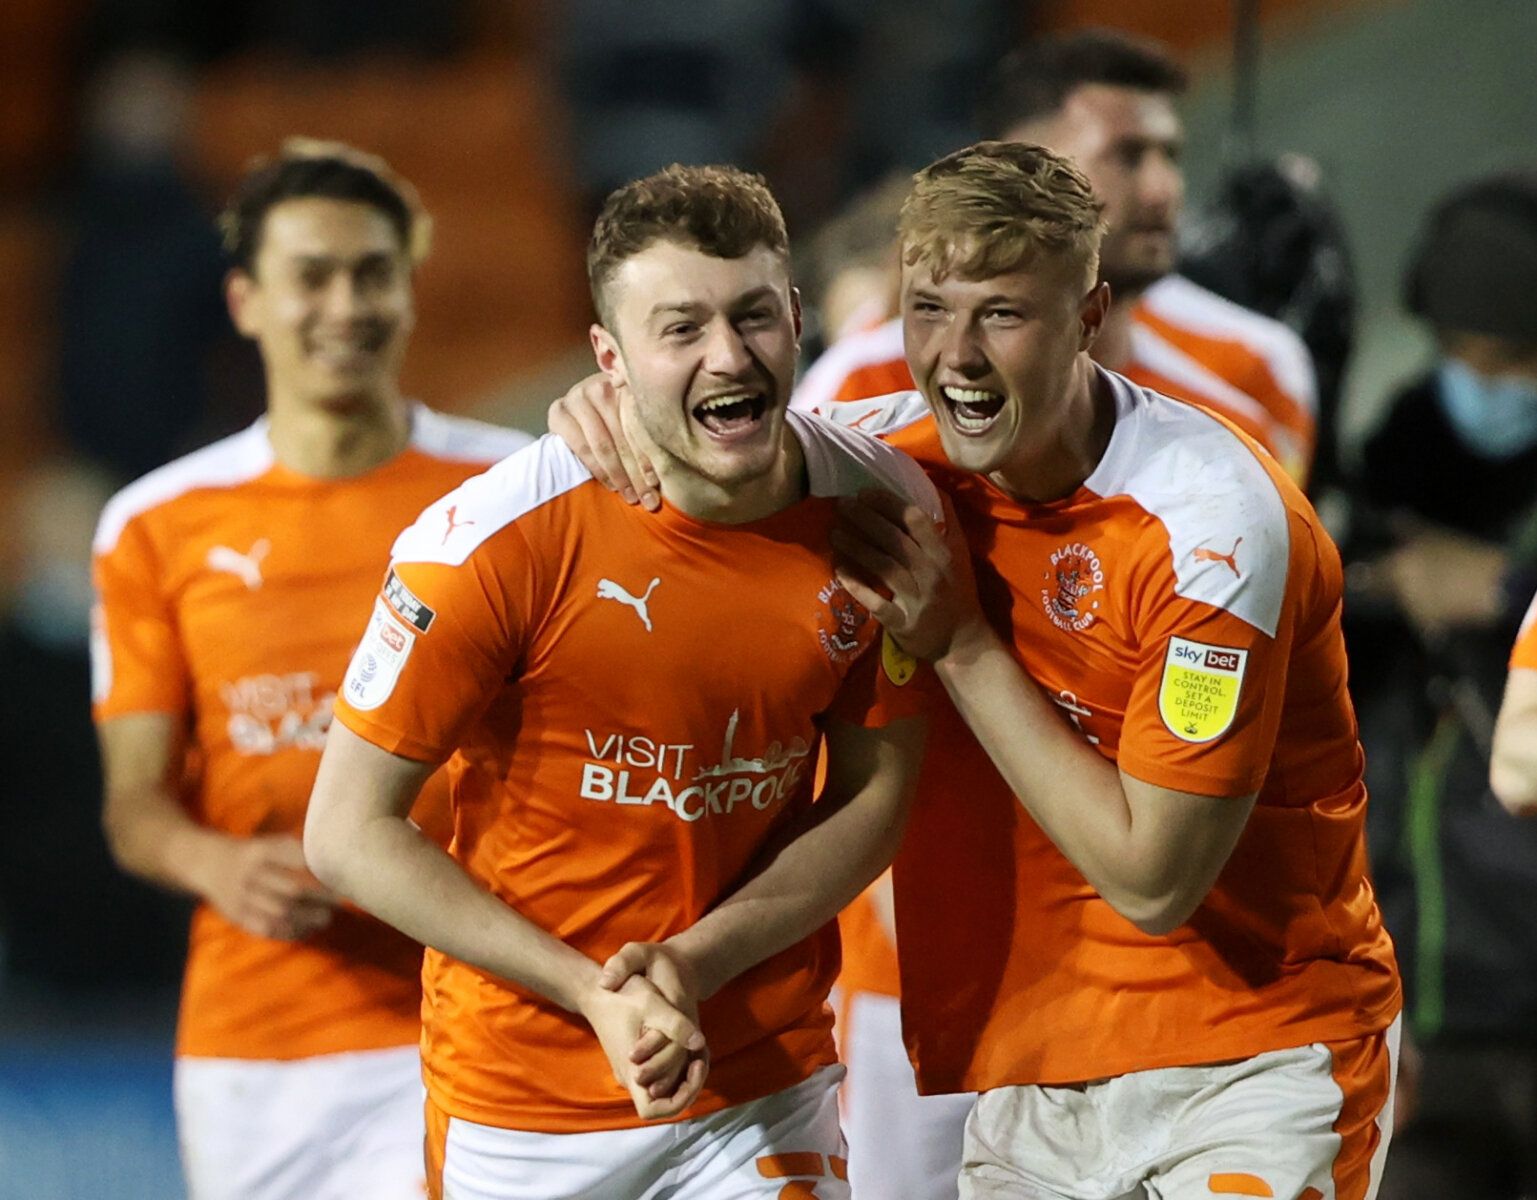 Soccer Football - League One Play-Off Semi Final Second Leg - Blackpool v Oxford United - Bloomfield Road Stadium, Blackpool, Britain - May 21, 2021 Blackpool's Eliot Embleton and Daniel Ballard celebrate with teammates after the match Action Images/Molly Darlington EDITORIAL USE ONLY. No use with unauthorized audio, video, data, fixture lists, club/league logos or 'live' services. Online in-match use limited to 75 images, no video emulation. No use in betting, games or single club /league/playe